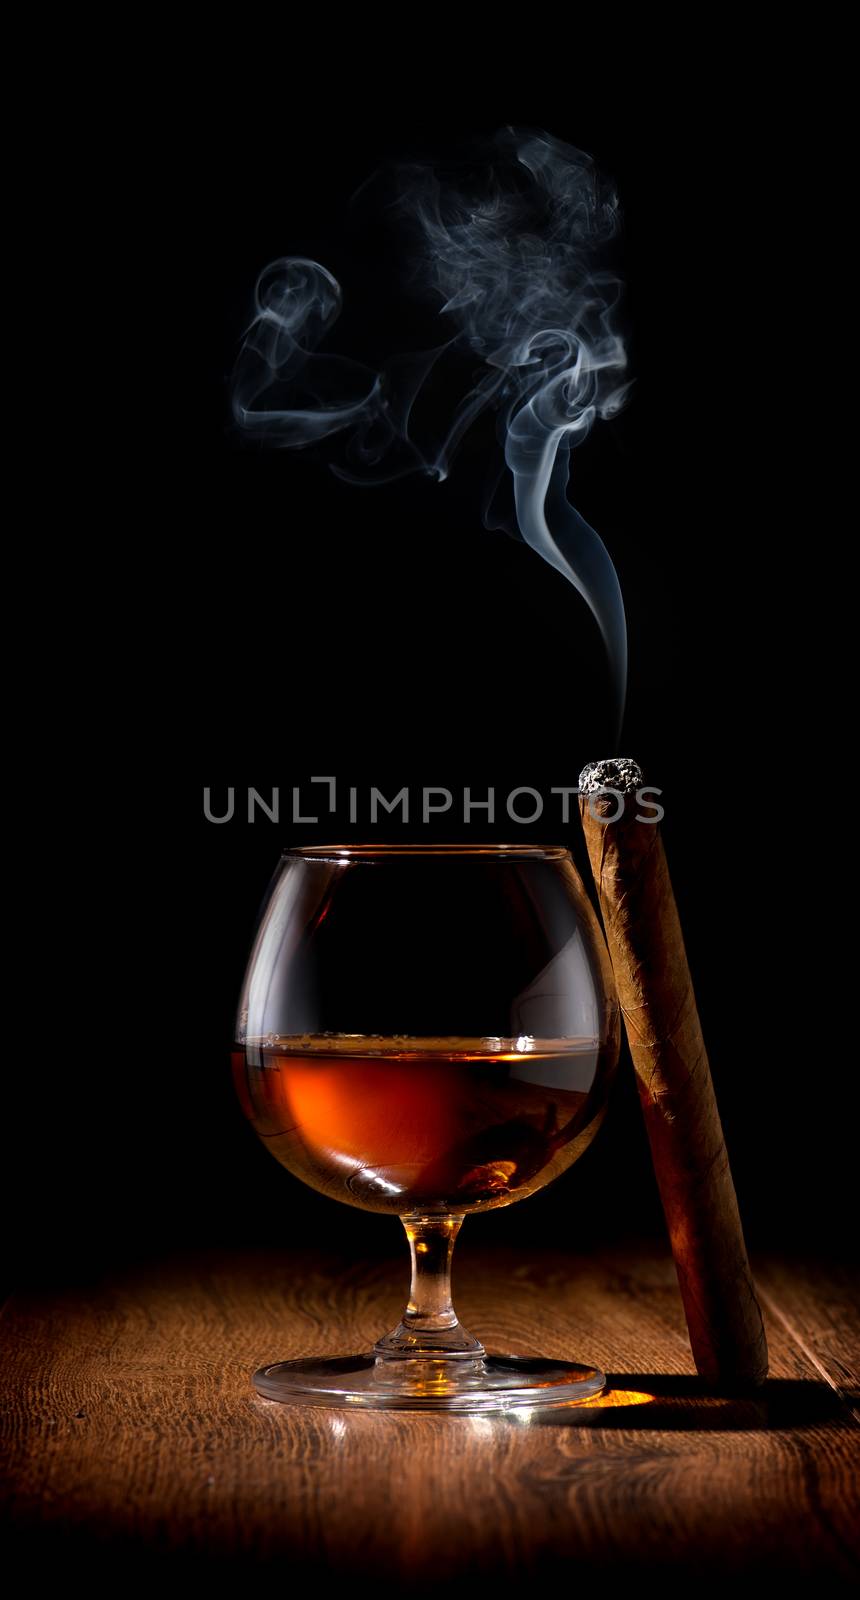 Wineglass of scotch and cigar on wooden table